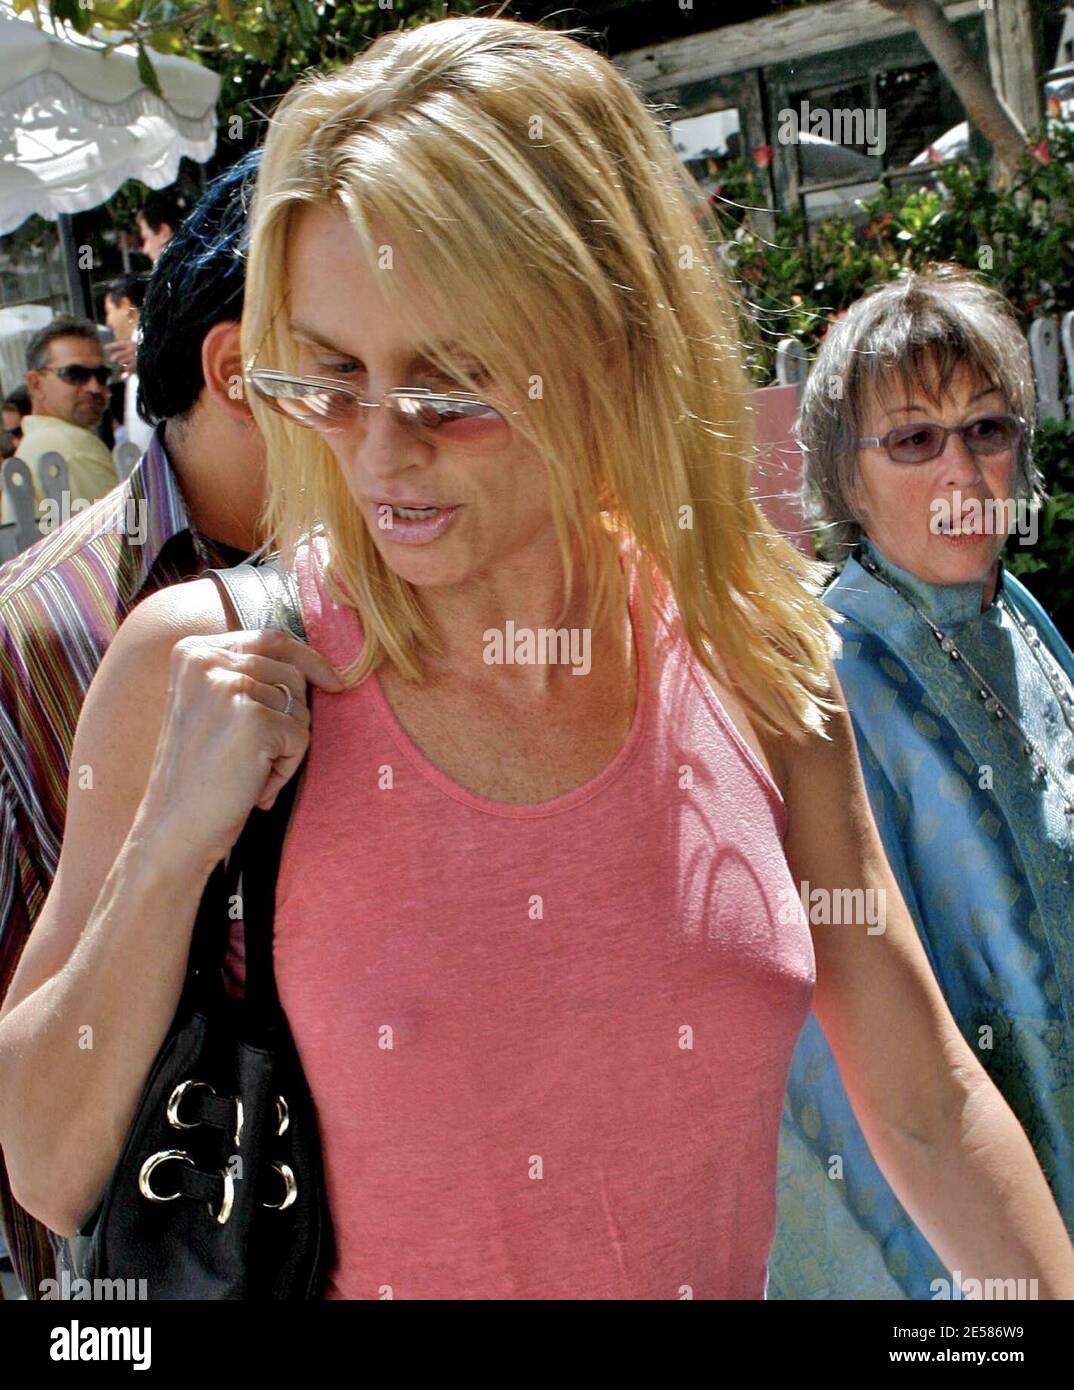 A perky Nicollette Sheridan shops along Robertson Boulevard with friends. The actress bought a new set of clothes but apparently no bra. Sheridan wore the new outfit out of the store and helped her friend to her feet when she fell during the shopping trip. West Hollywood, Calif. 5/24/07.  [[laj]] *** Local Caption *** A braless Nicollette Sheridan shops along Robertson Boulevard in West Hollywood. She even bough a new set of clothes which she wore out of the store. 5/24/2007 Stock Photo